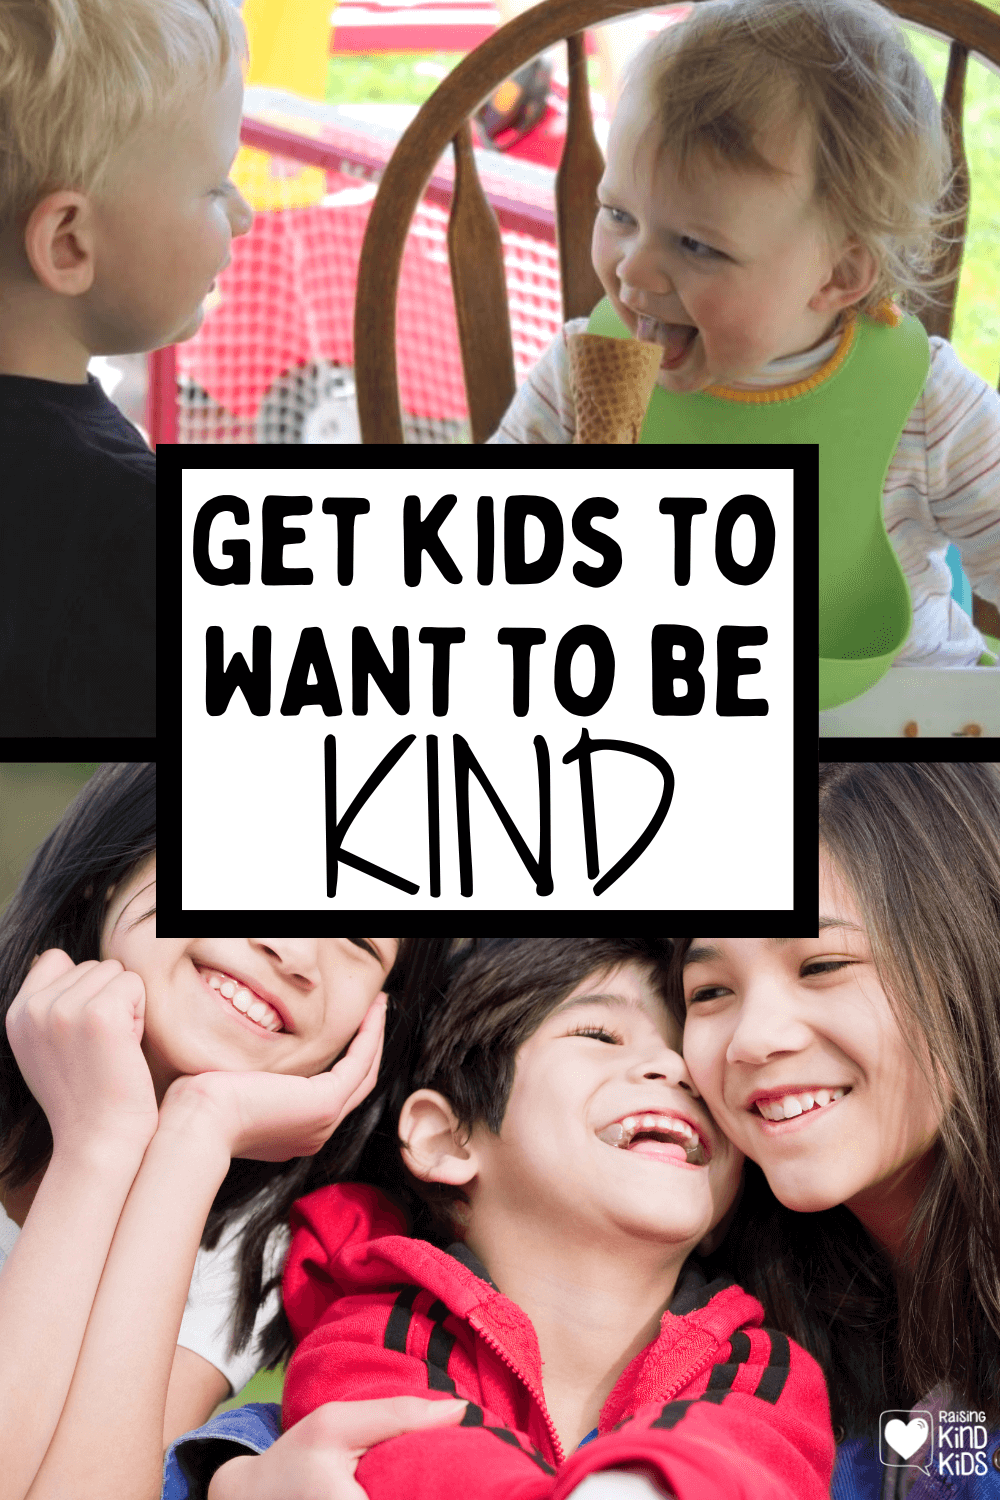 Join thousands of parents who already Know the 3 secrets to get our Kids to be Kind more often with less reminders. Get the FREE Video here so you know these strategies too.